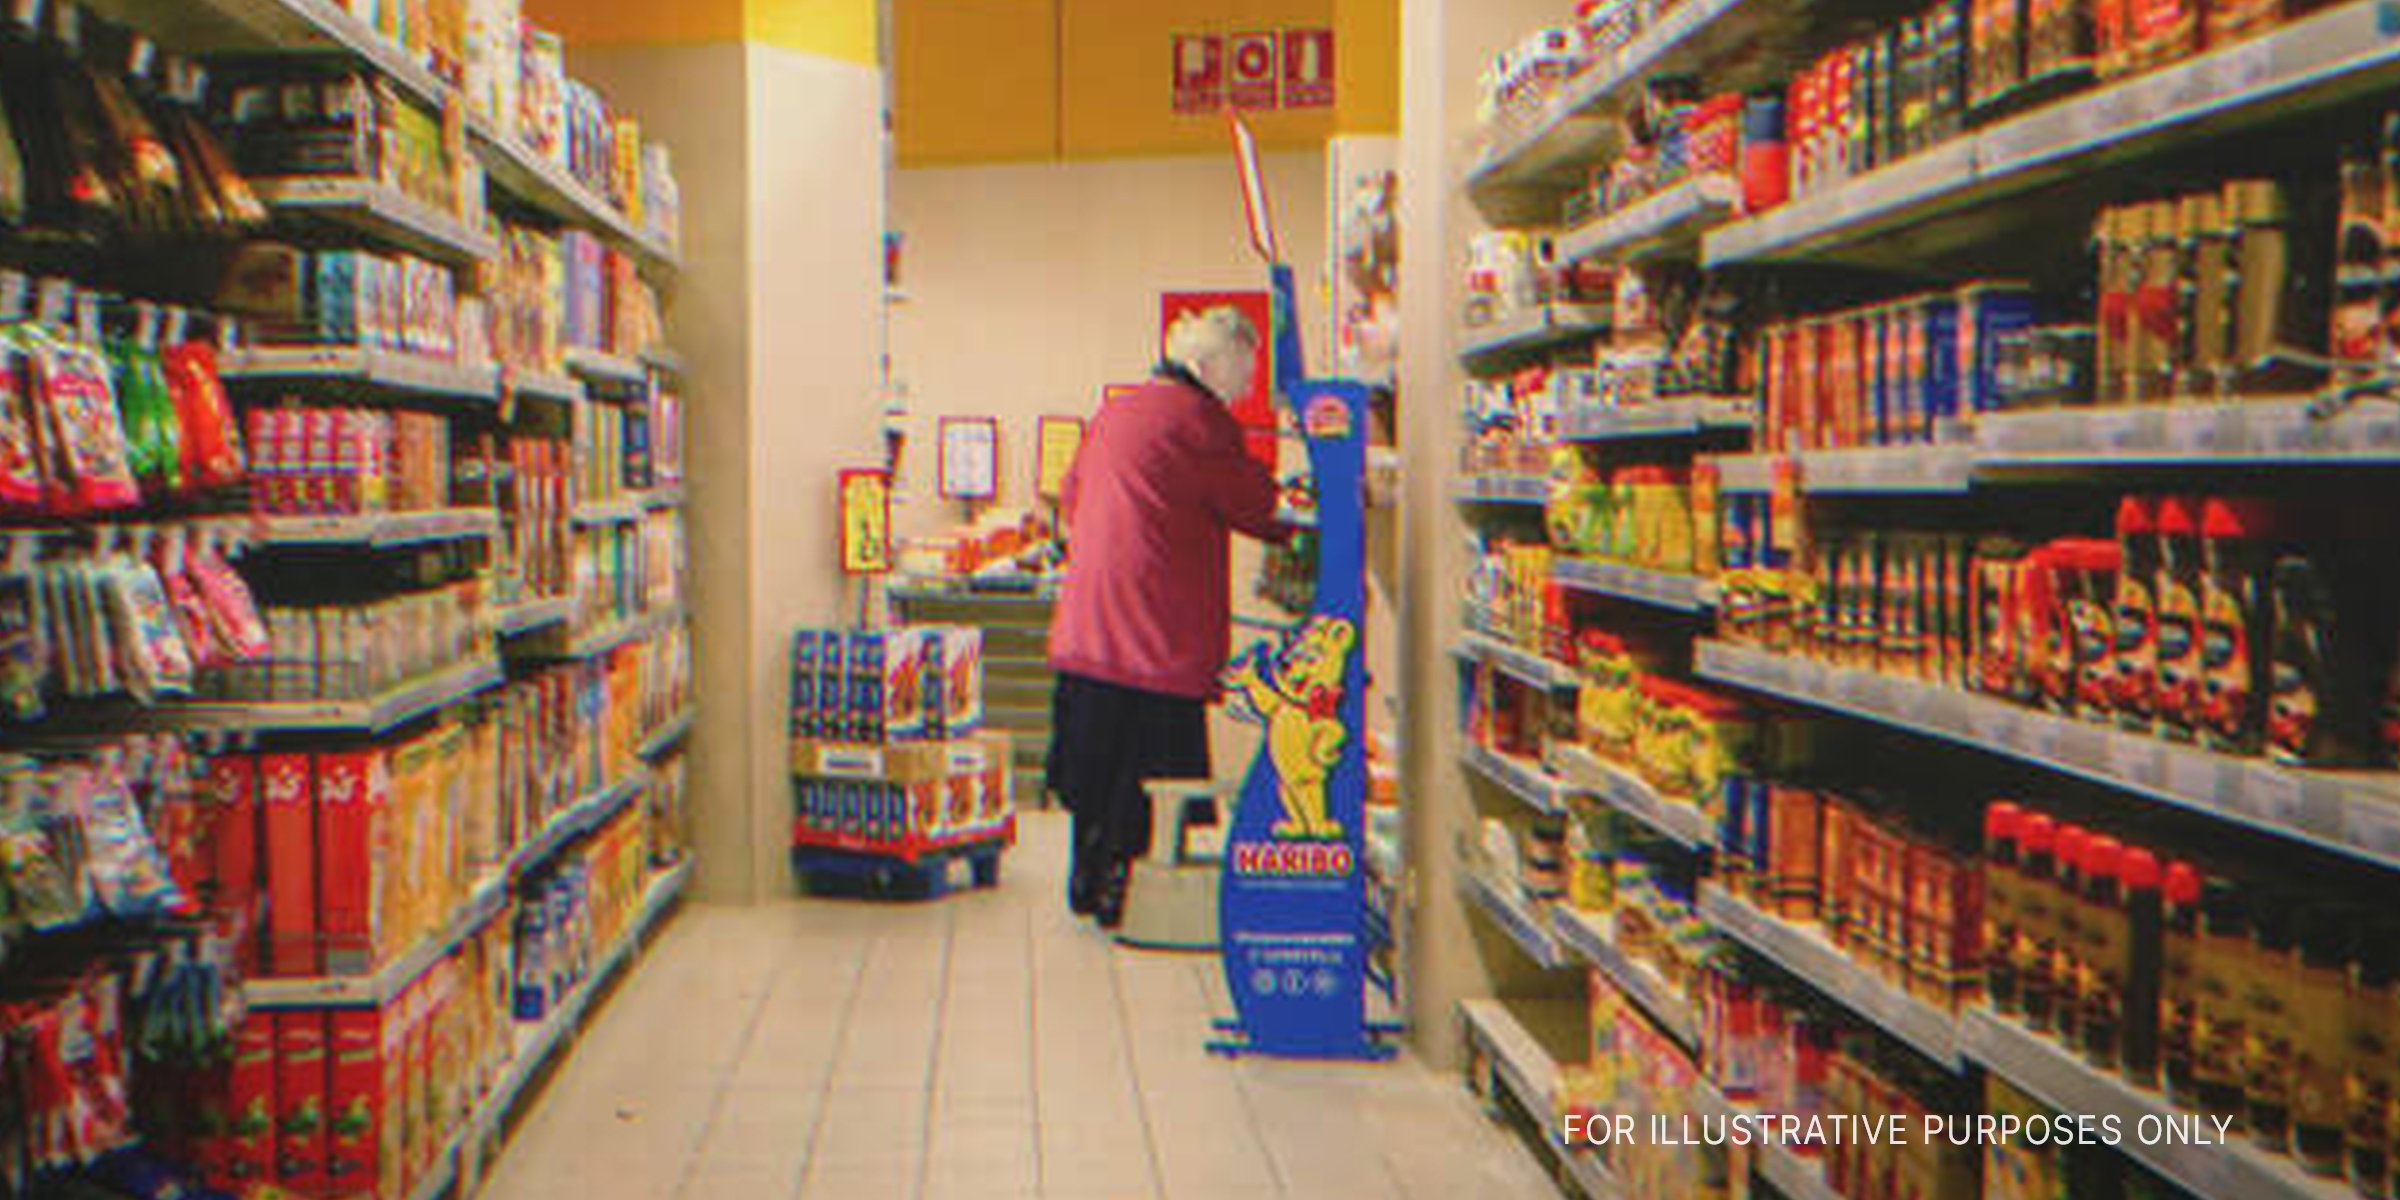 Elderly woman in grocery store | Source: Getty Images